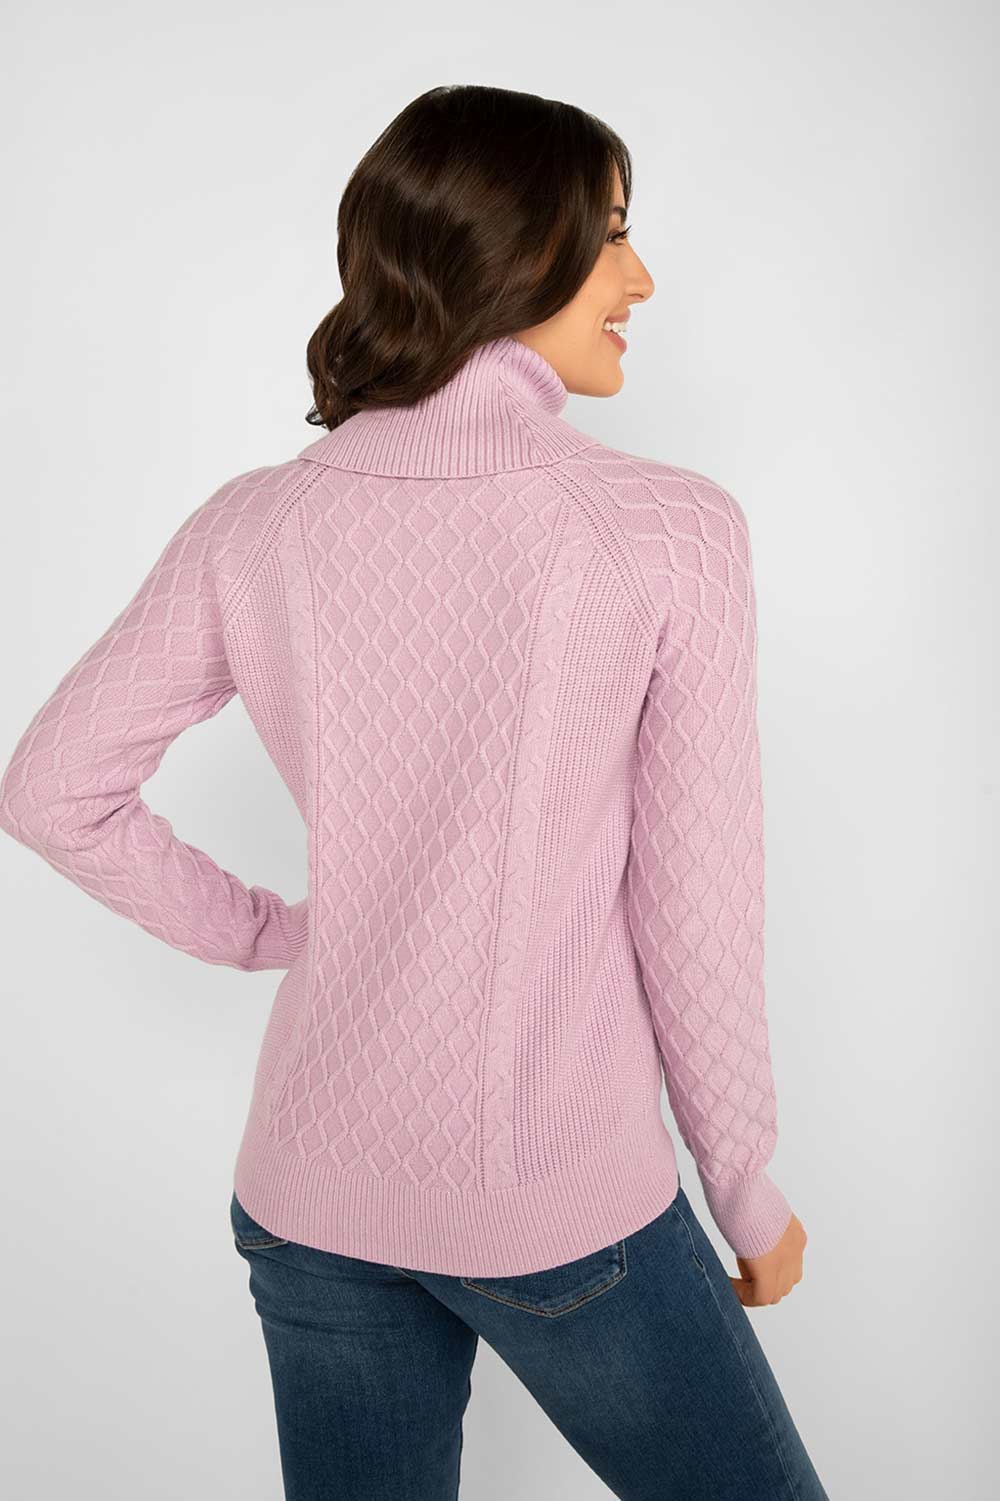 Women's Clothing ALISON SHERI (A42066) Cable Knit Turtleneck Sweater in LILAC